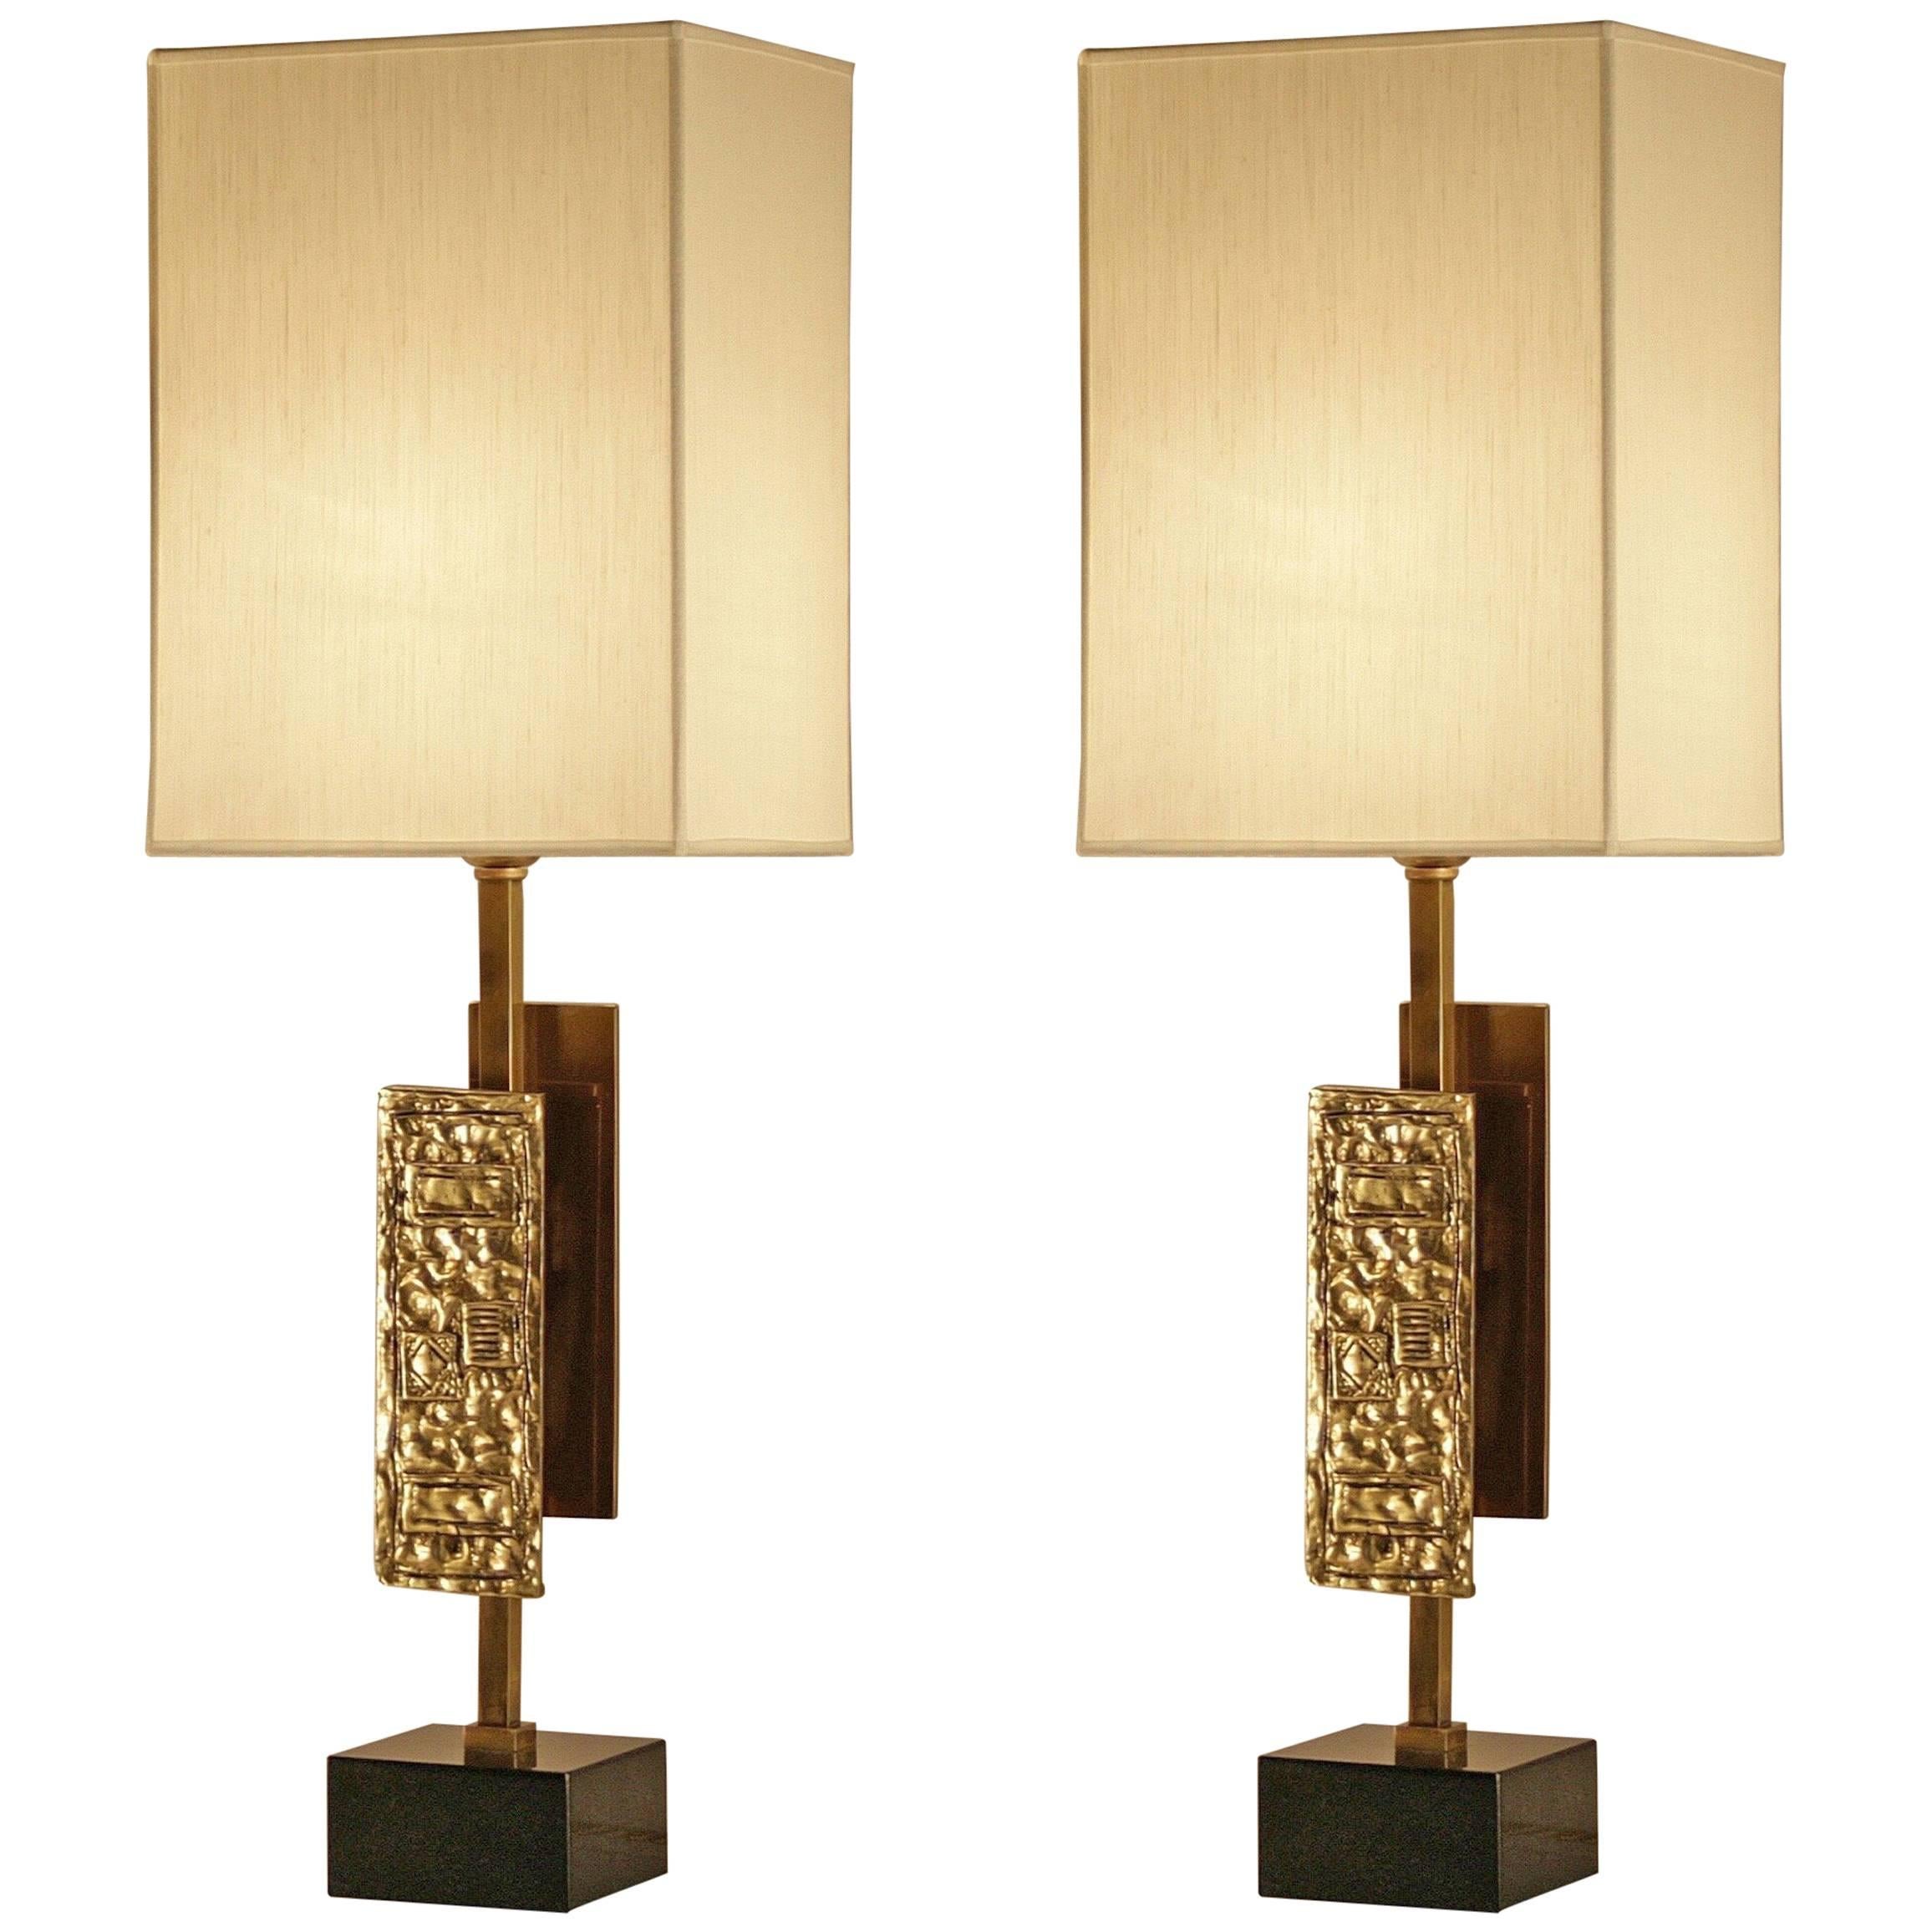 Pair of "Casanova" Lamps by Esperia, Italy, 2017 For Sale